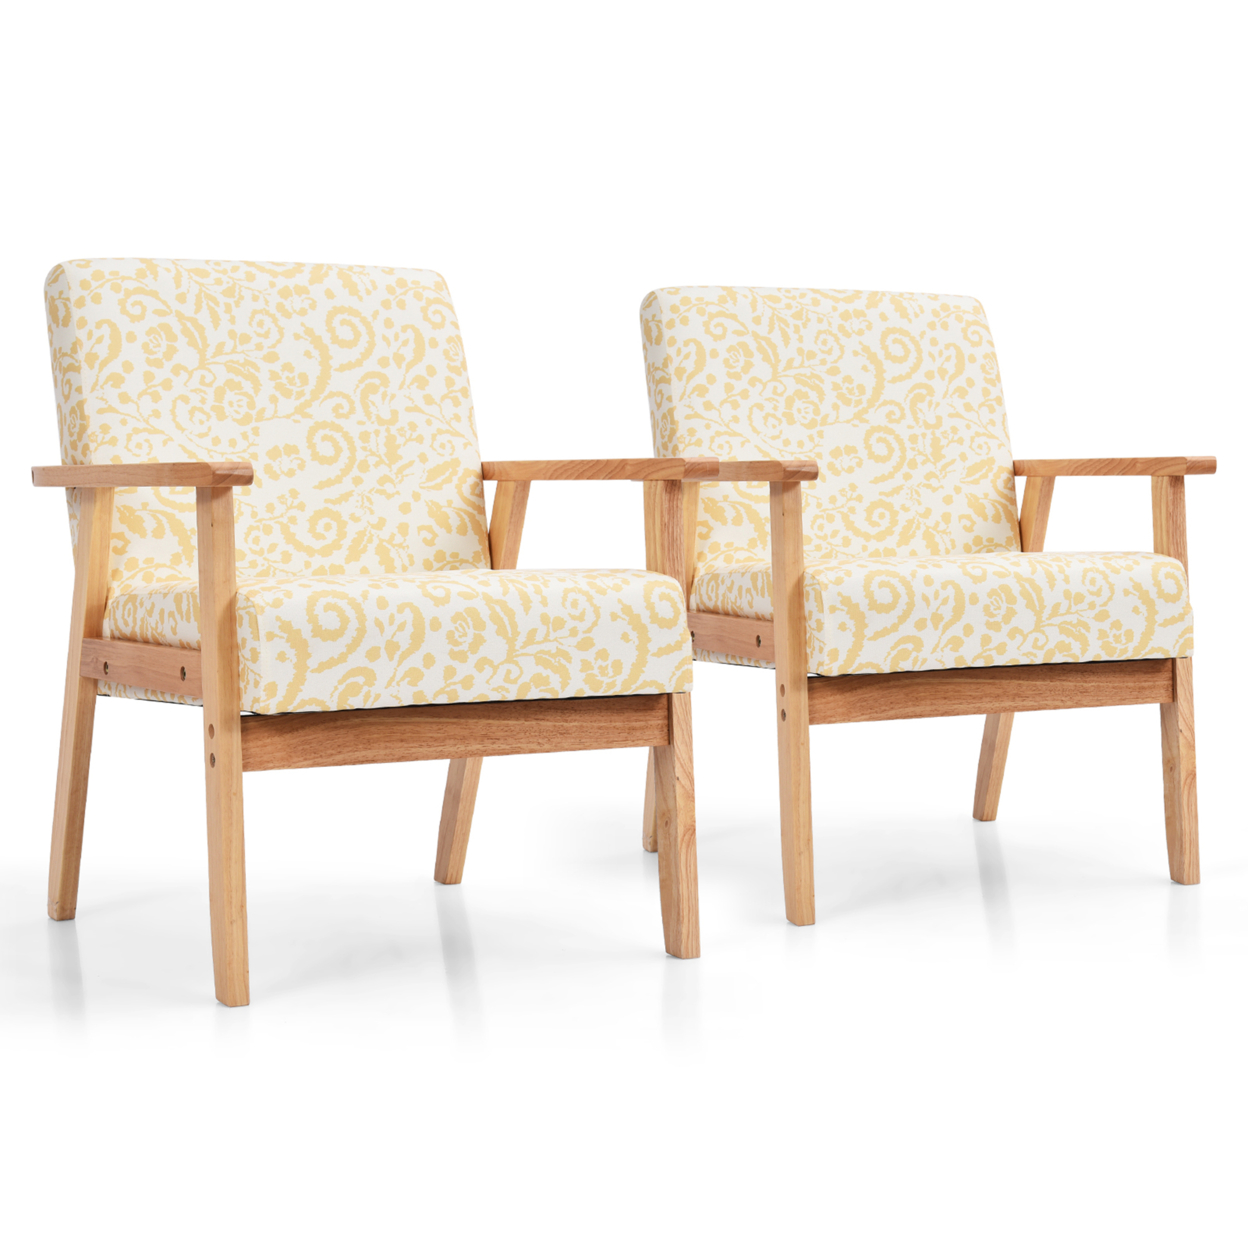 2PCS Accent Armchair Upholstered Chair Home Office W/ Wooden Frame White/Blue/Yellow - Yellow